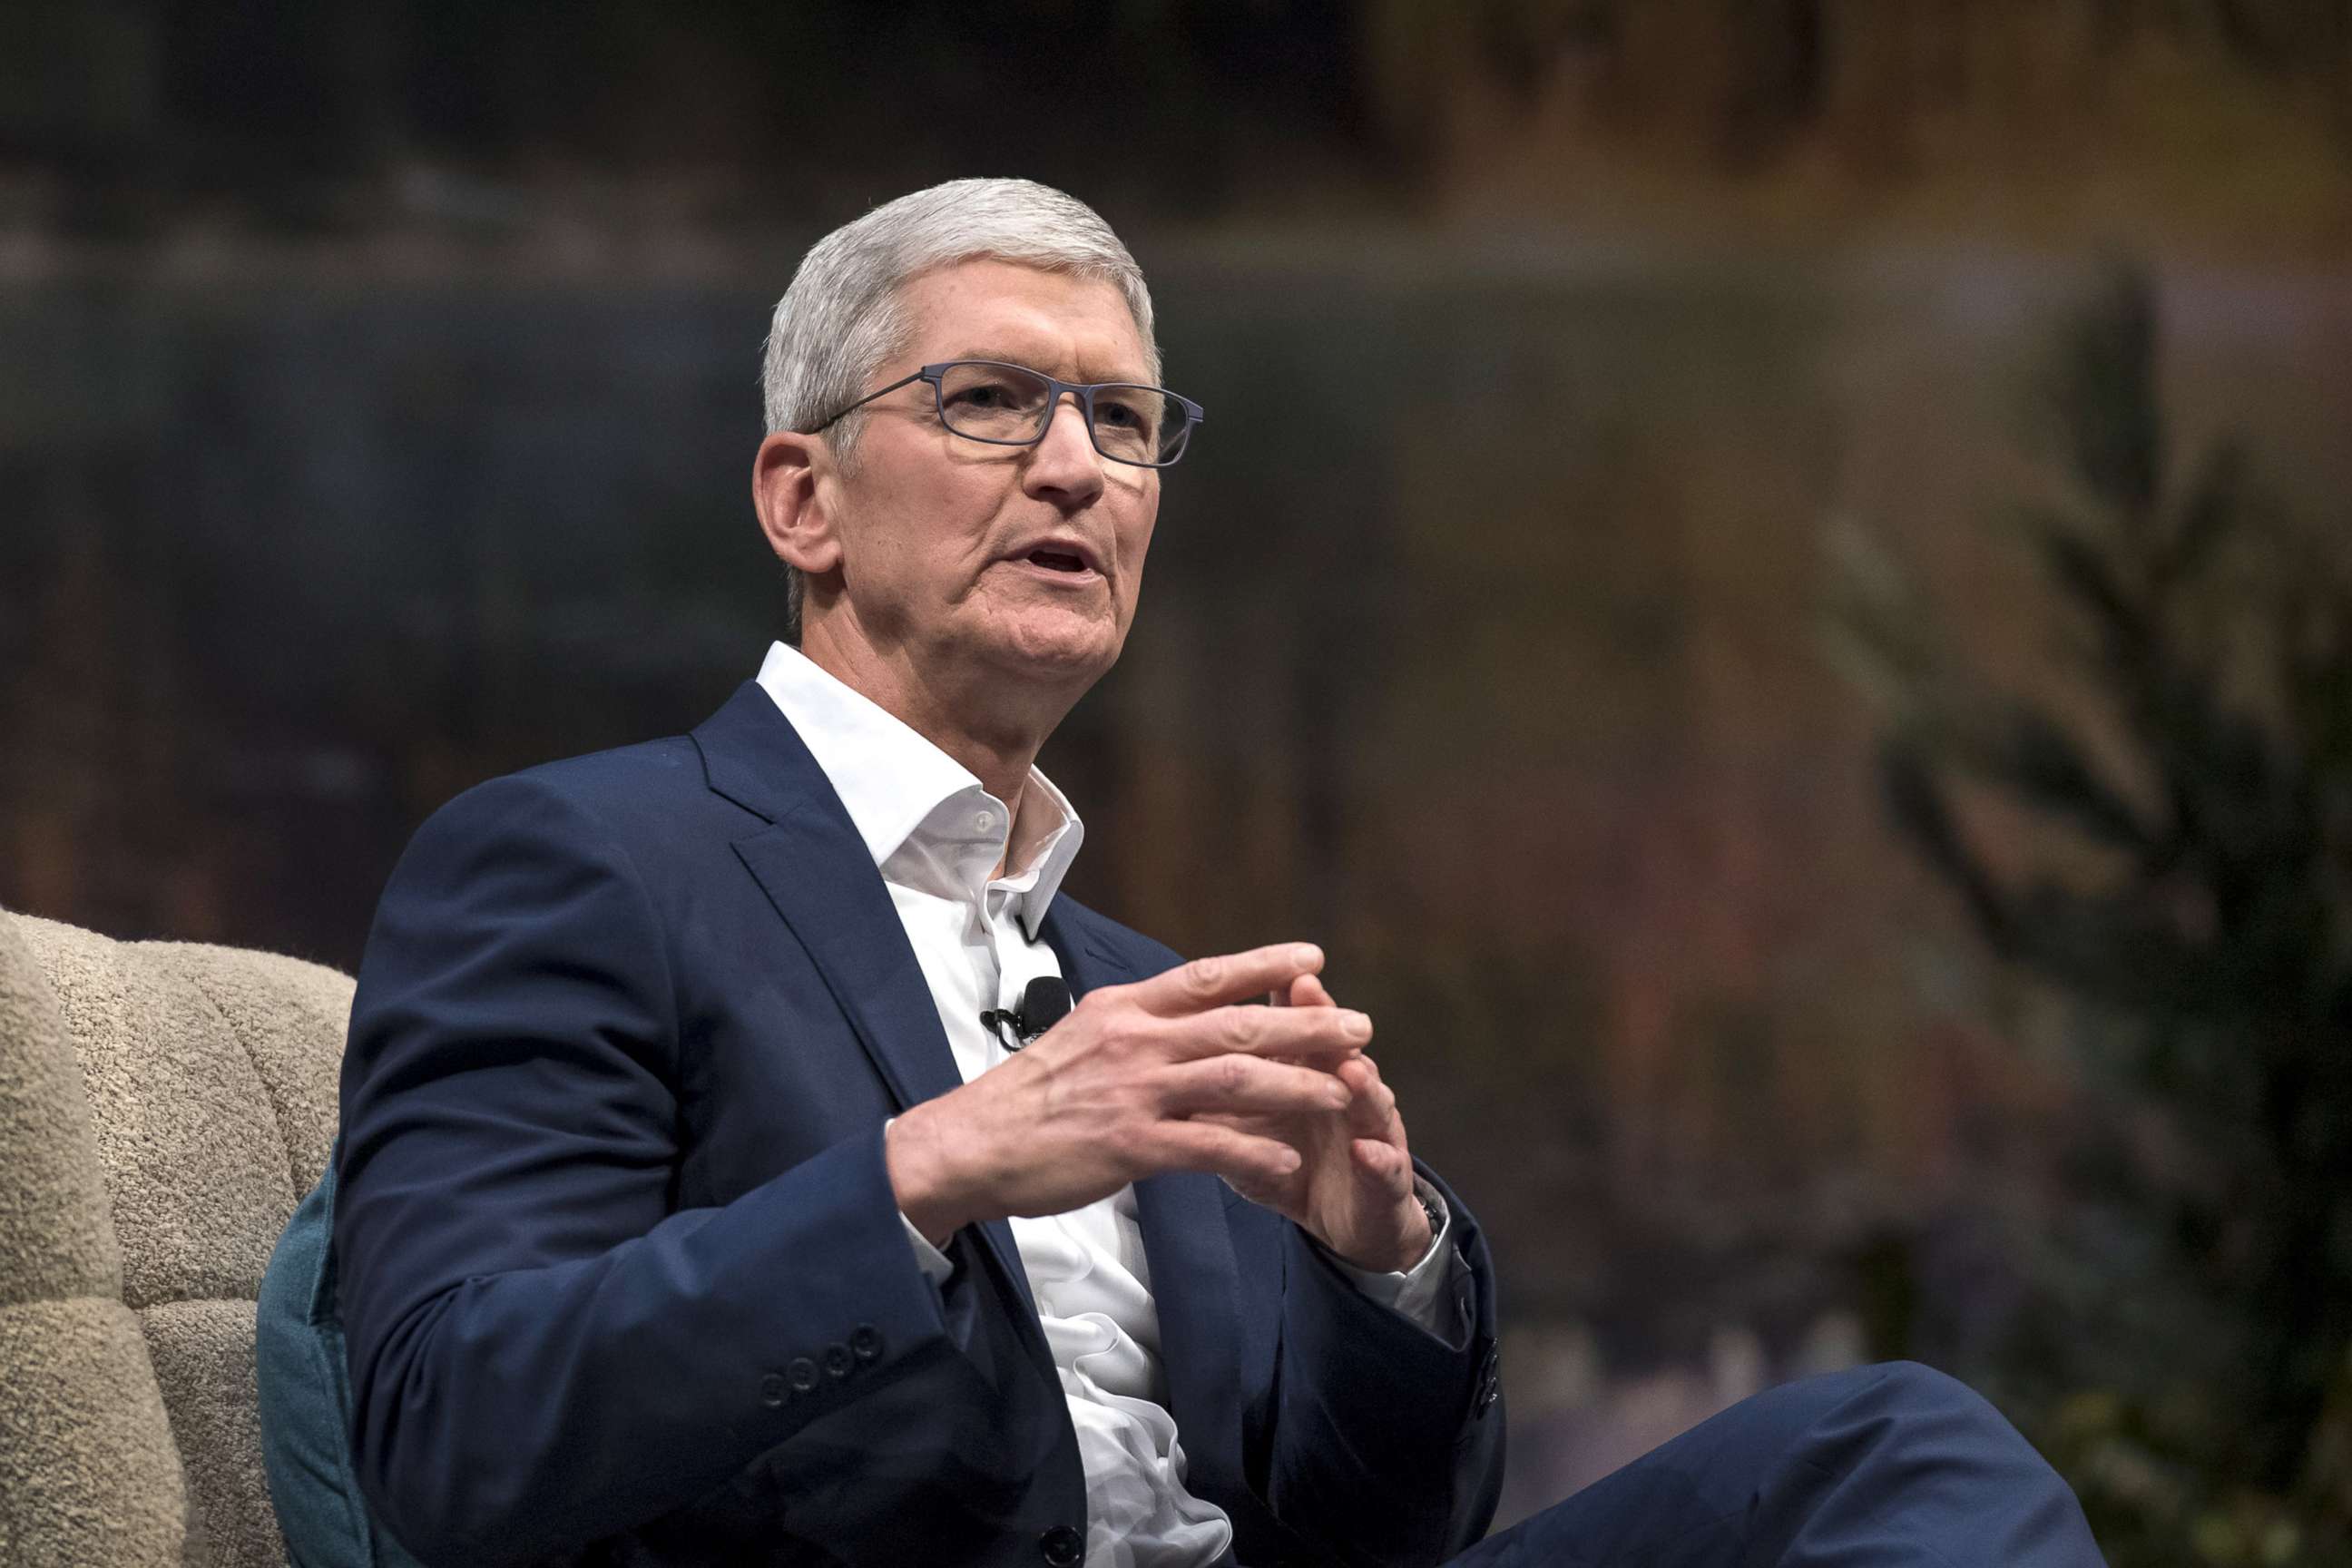 PHOTO: Tim Cook, chief executive officer of Apple Inc., speaks during the 2019 DreamForce conference in San Francisco.